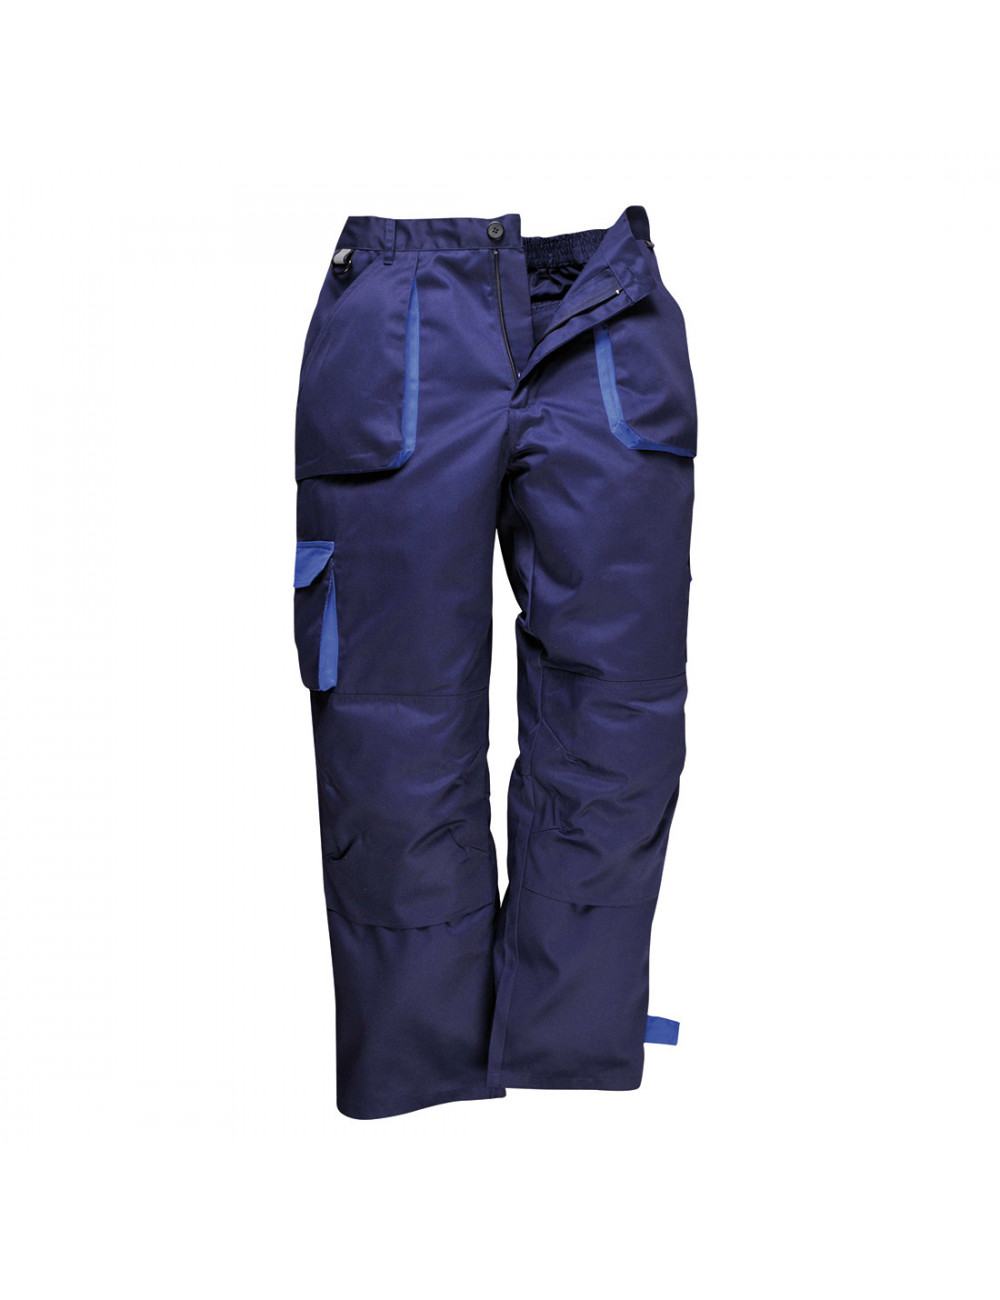 Texo insulated trousers. navy Portwest Portwest